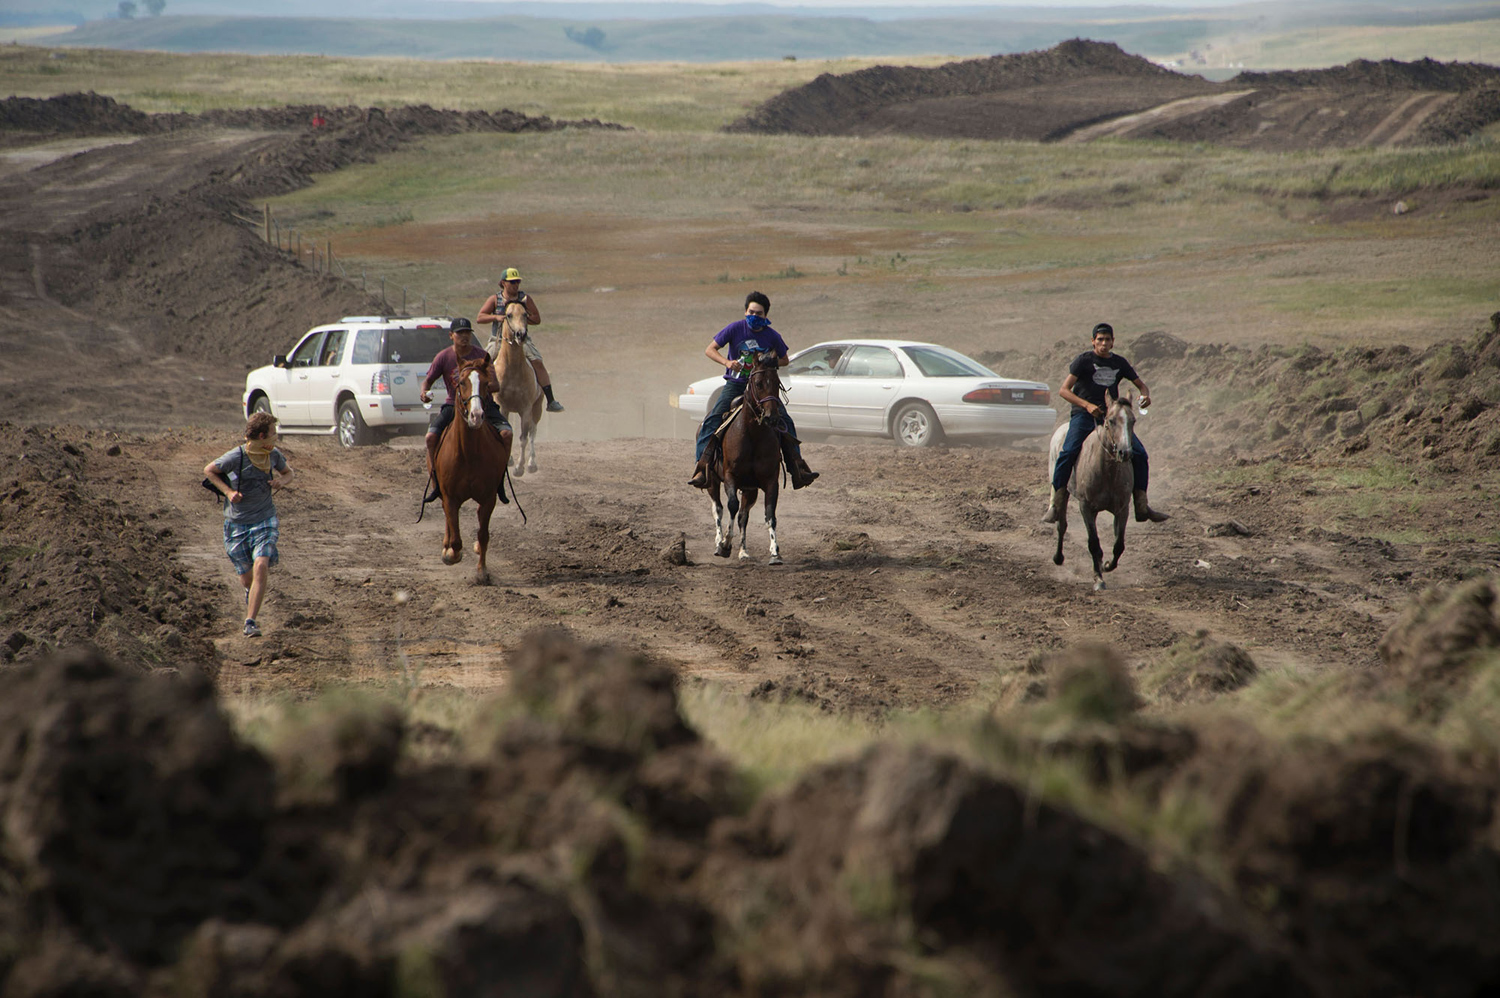 Protestors on horseback gallop away after members of the Standing Rock Sioux tribe and their supporters confronted a bulldozer crew and the private security team protecting the work site for the Dakota Access Pipeline (DAPL), near the Standing Rock Indian Reservation near Cannon Ball, North Dakota, September 3, 2016.    The protestors, who call themselves water protectors, left the area after forcing the pipeline workers and security crew to retreat.  / AFP / Robyn BECK        (Photo credit should read ROBYN BECK/AFP/Getty Images)